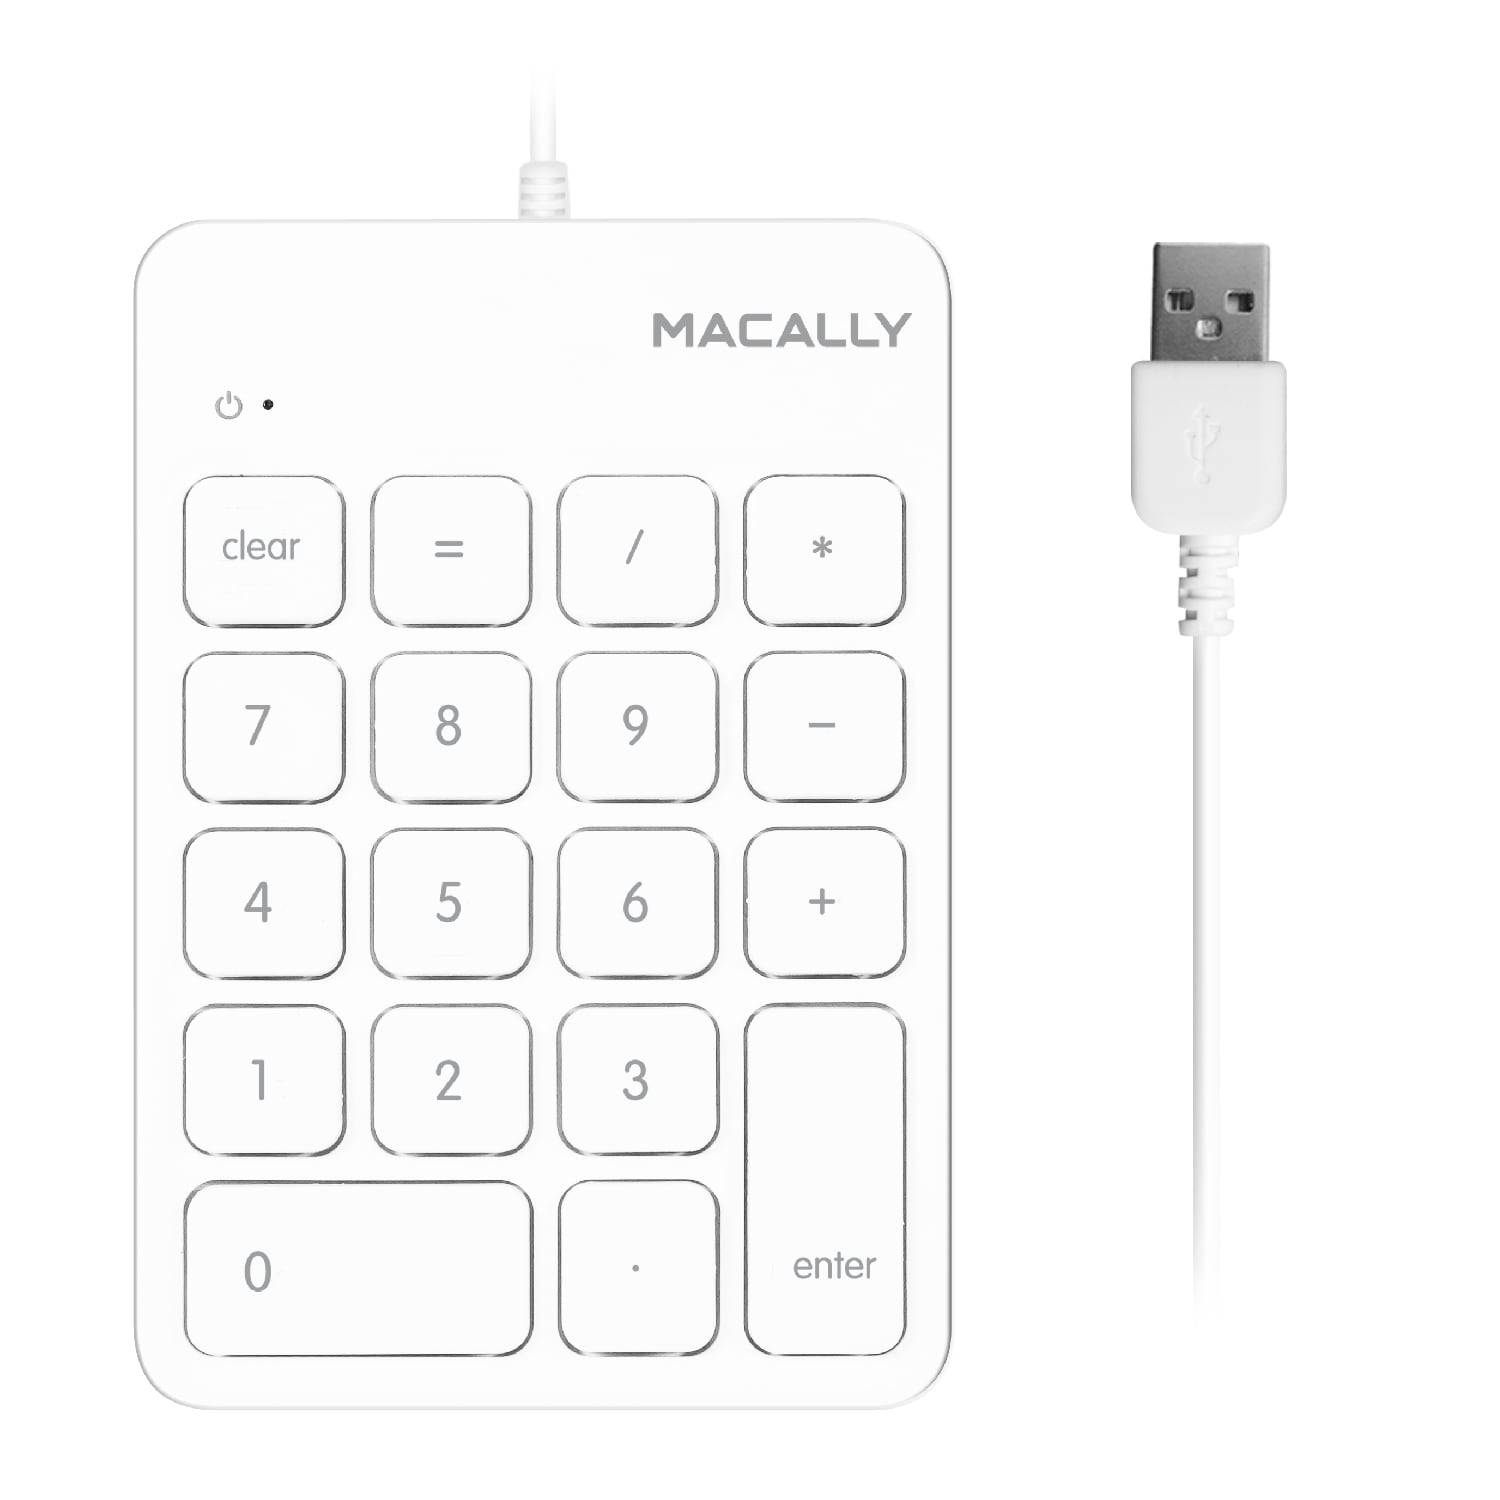 Macally Usb Numeric Keypad Keyboard For Laptop, Mac Imac, Macbook Pro/air, Windows Pc, or Desktop Computer with 5 Foot Cable and 18 Key Slim Number Pad Numerical Numpad- White (